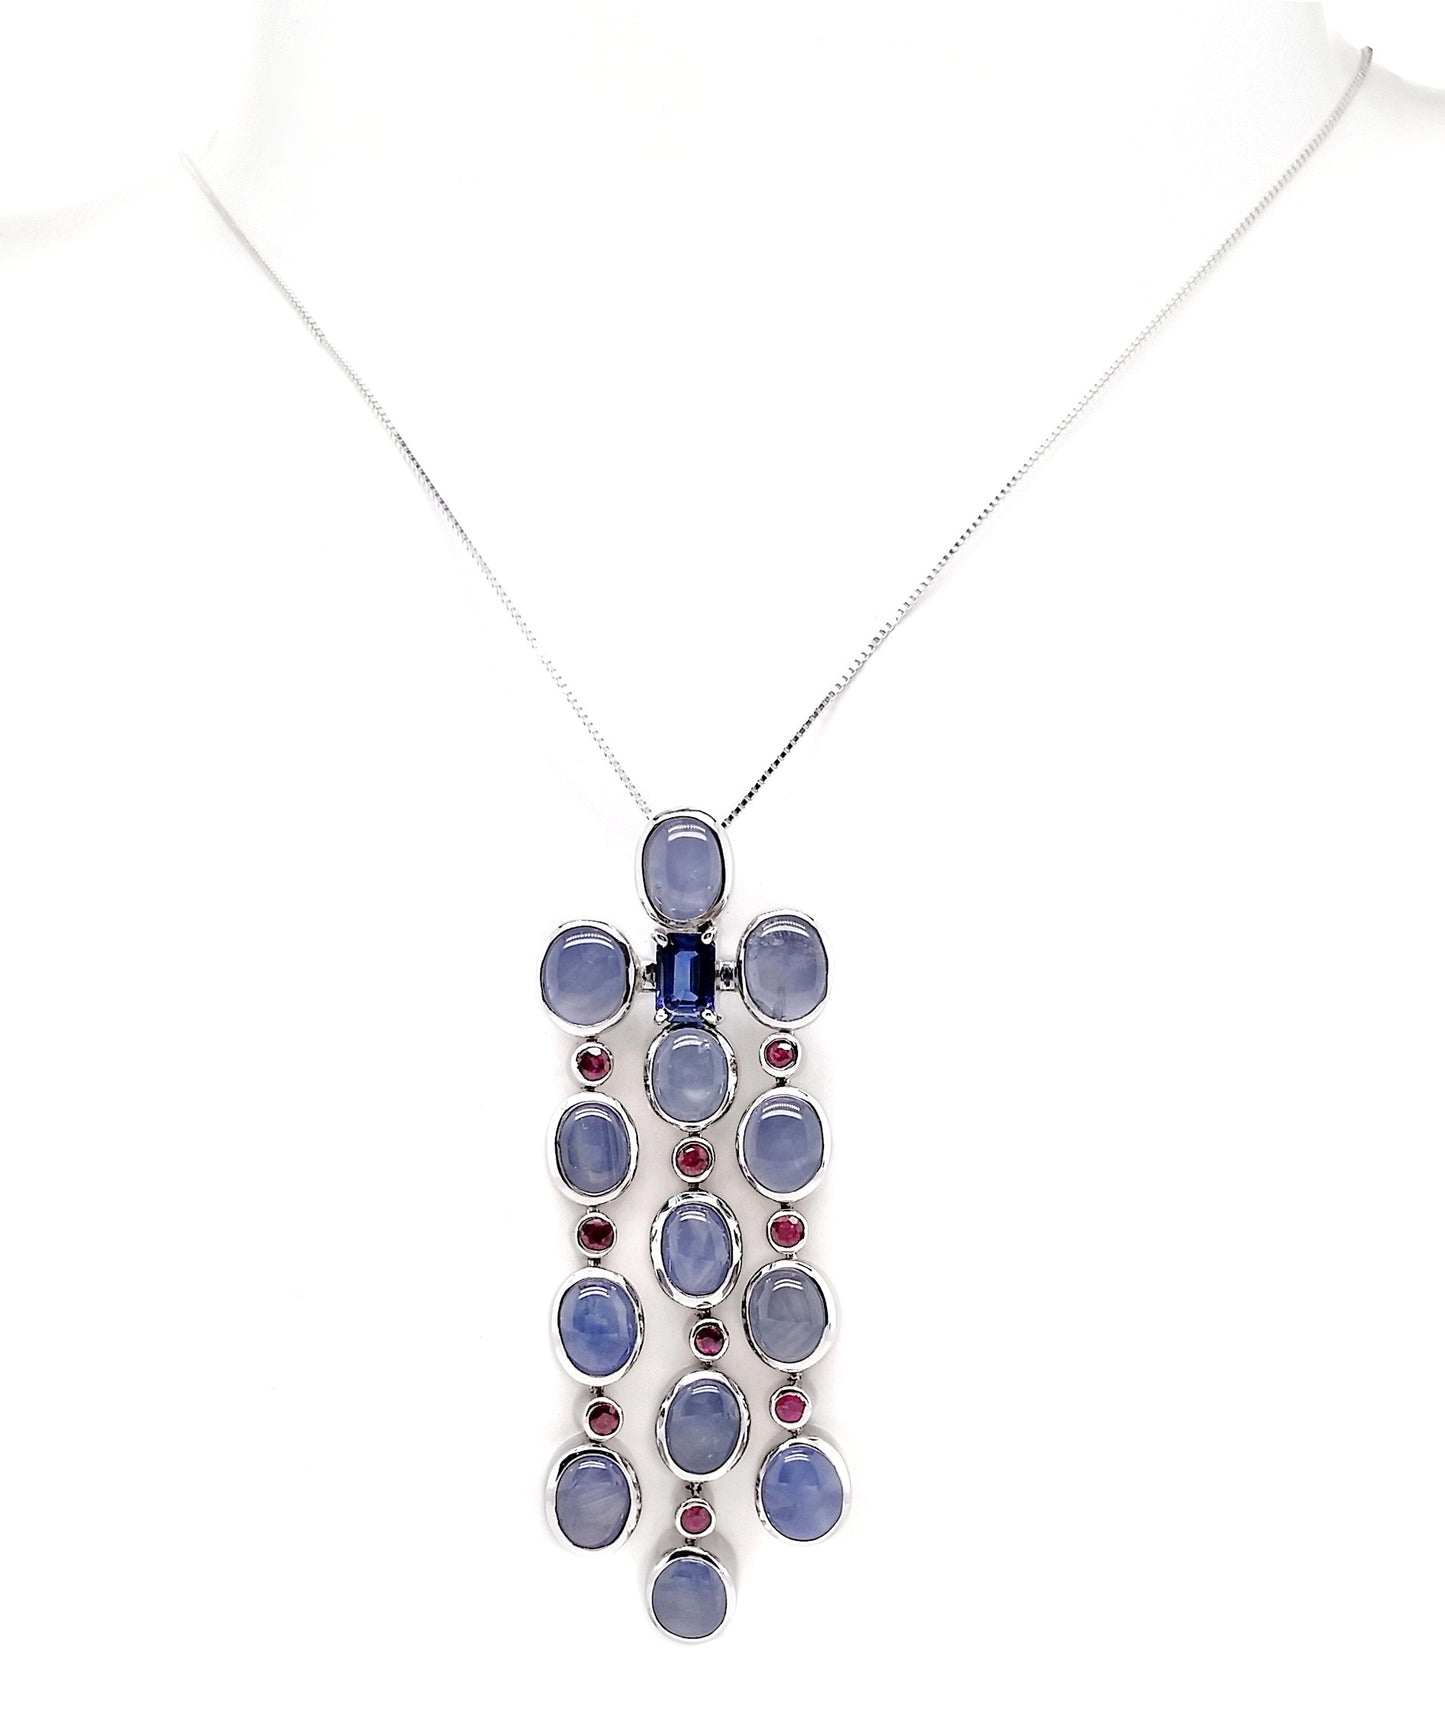 17.07ct NATURAL NOT-TREATED STAR SAPPHIRES, 0.75ct NATURAL SAPPHIRE and 0.74ct NATURAL RUBIES set with 18KG White Gold Necklace with Pendant